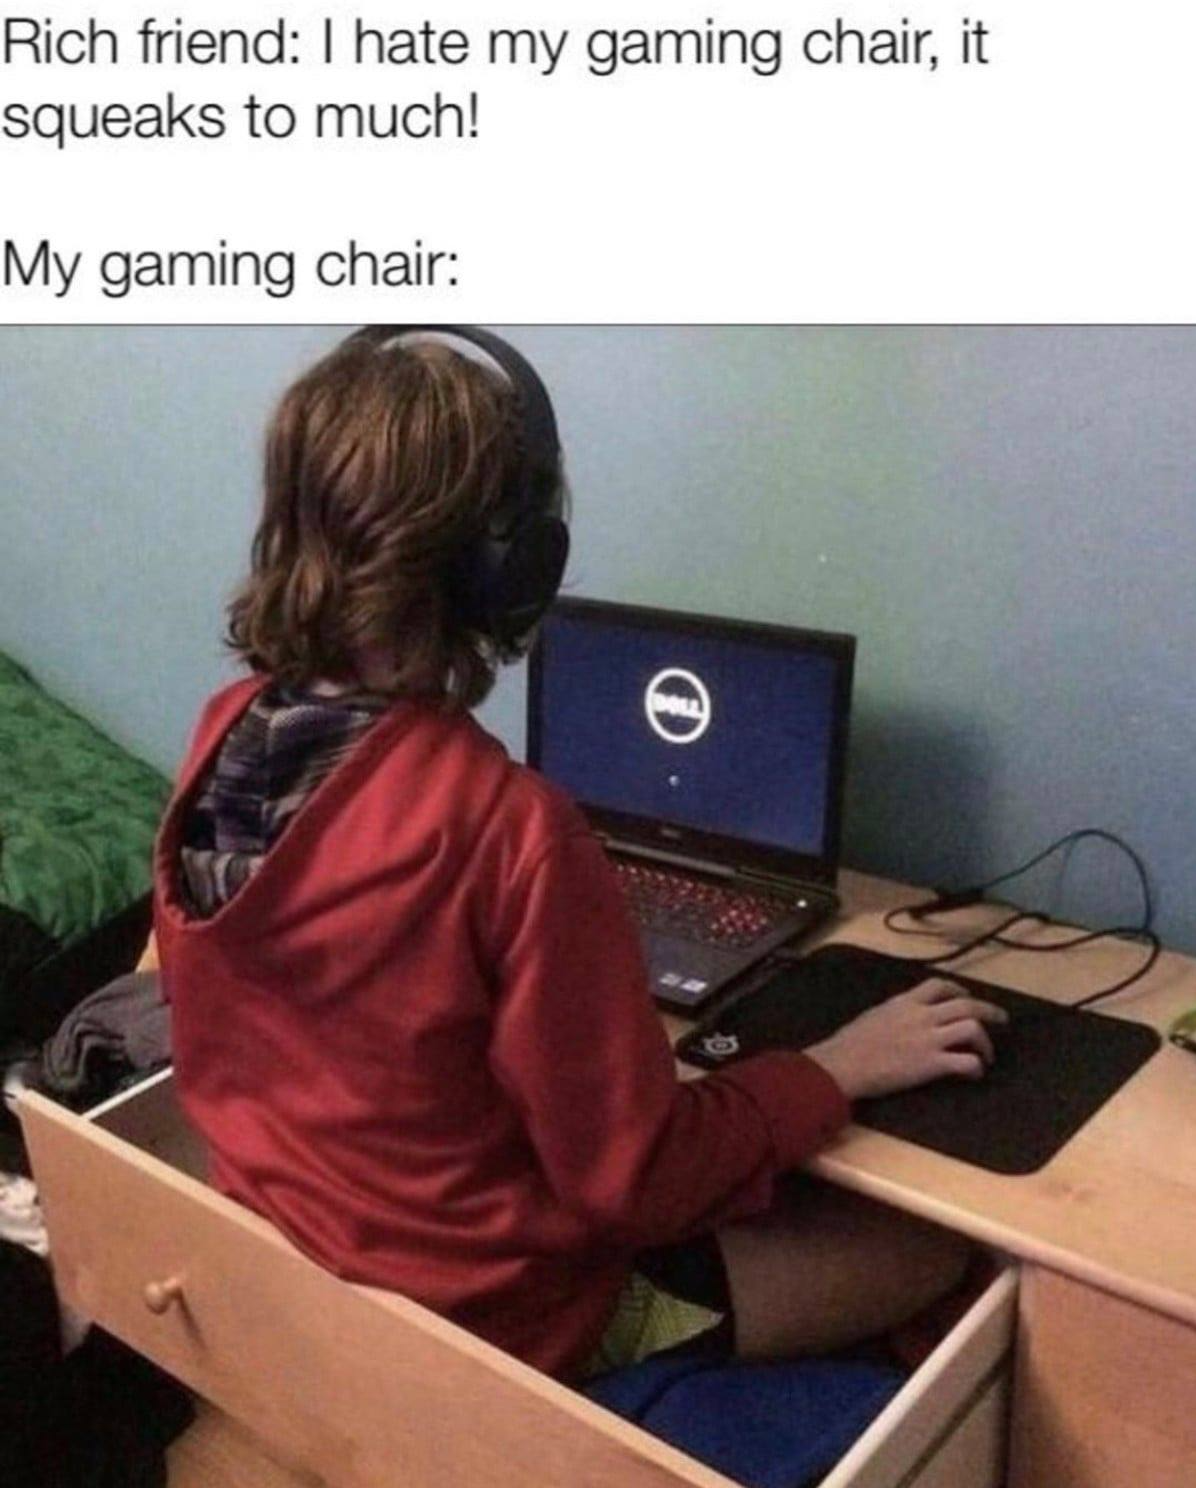 funny gaming memes - weird gaming setup - Rich friend I hate my gaming chair, it squeaks to much! My gaming chair